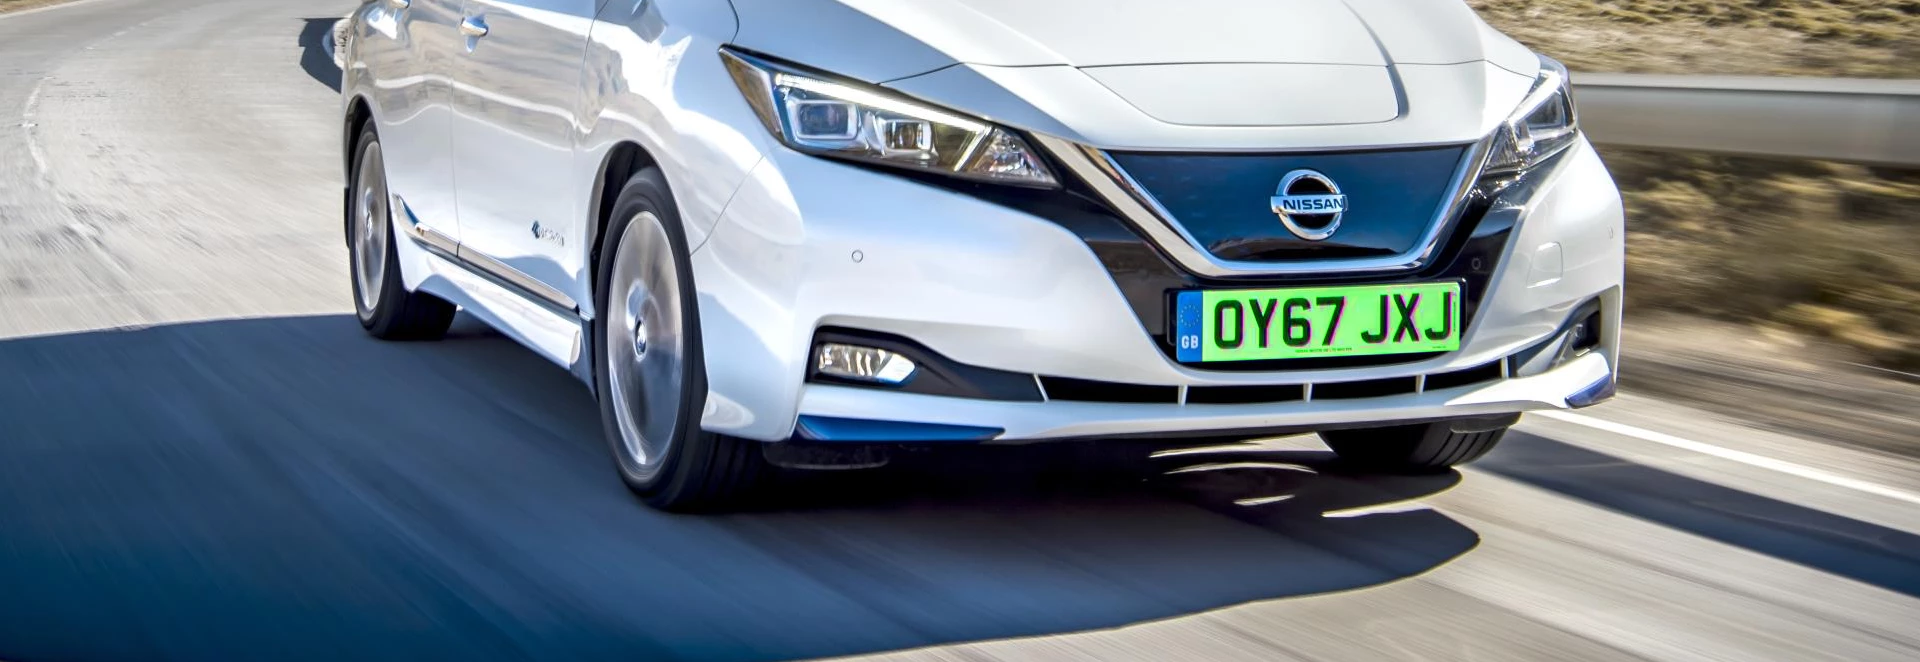 Low-emission vehicles could come with green plates